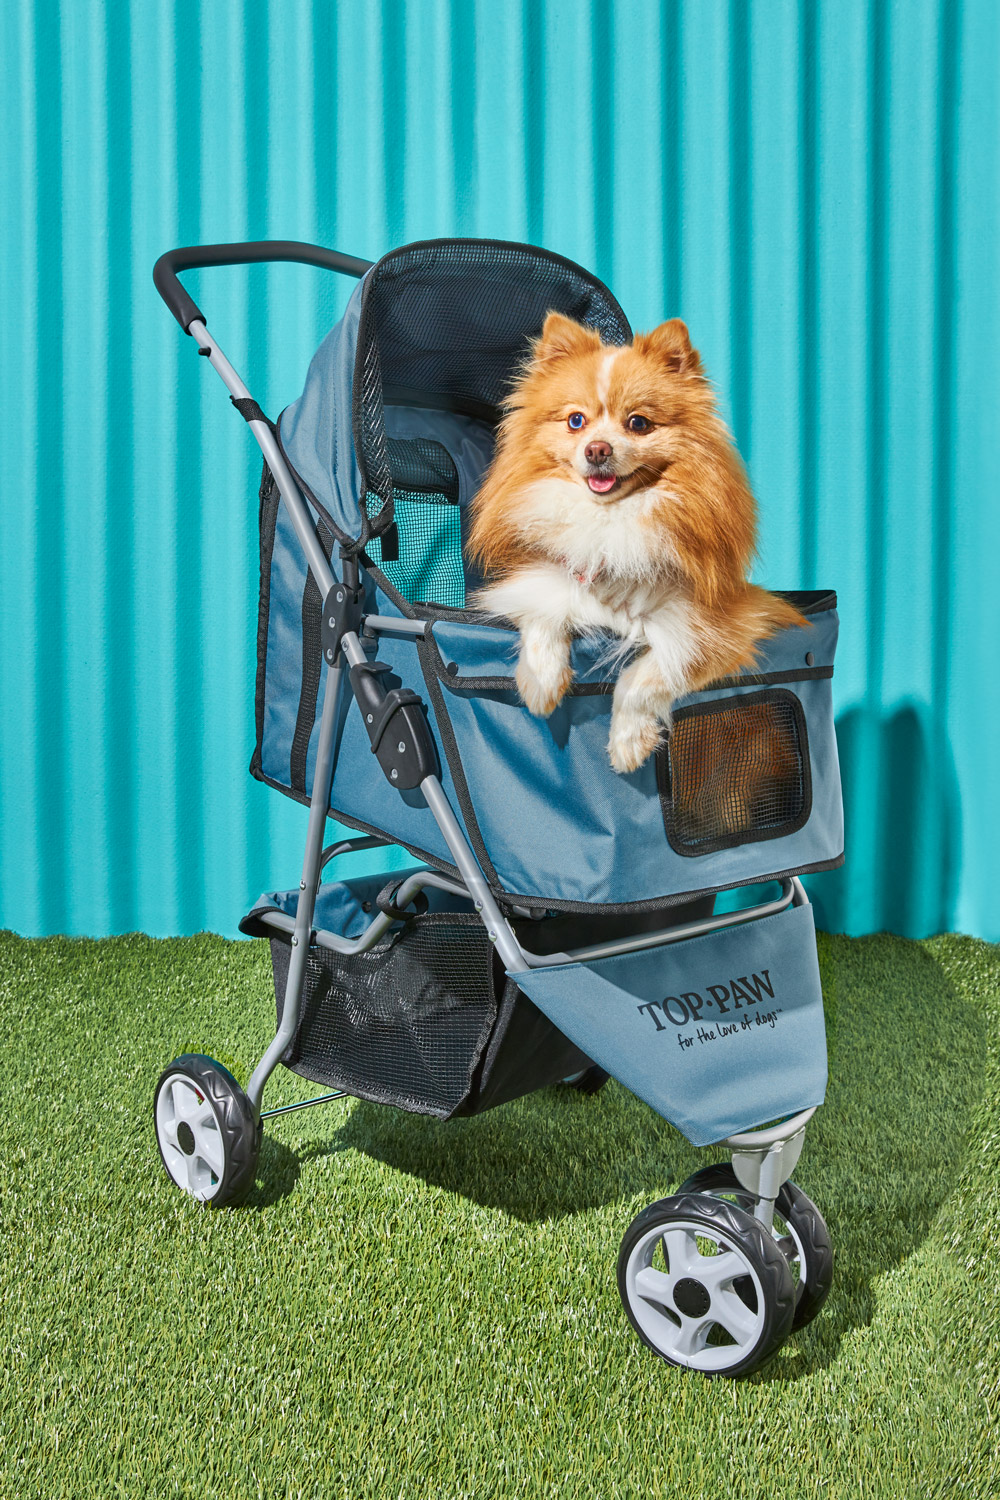 A photo of a dog in a stroller